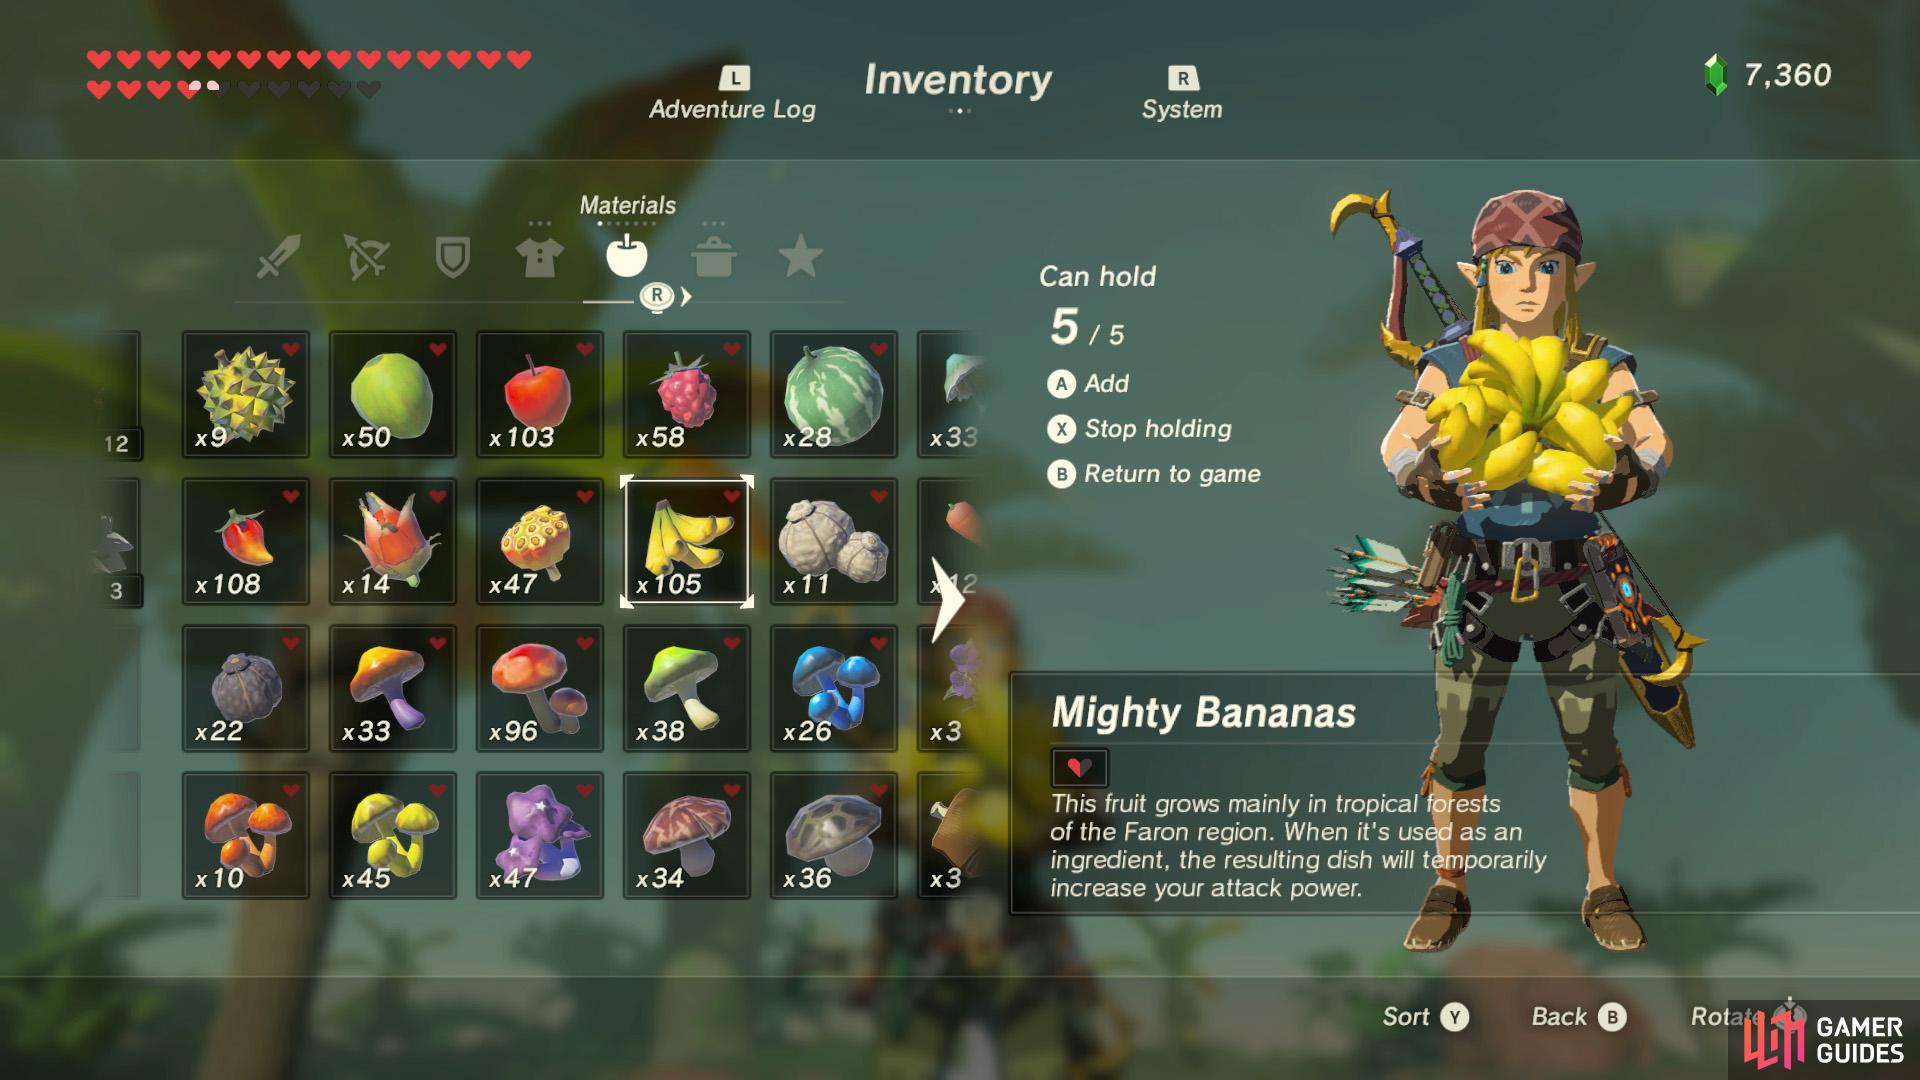 An armful of Mighty Bananas. Don’t let the Yiga Clan see you with these!